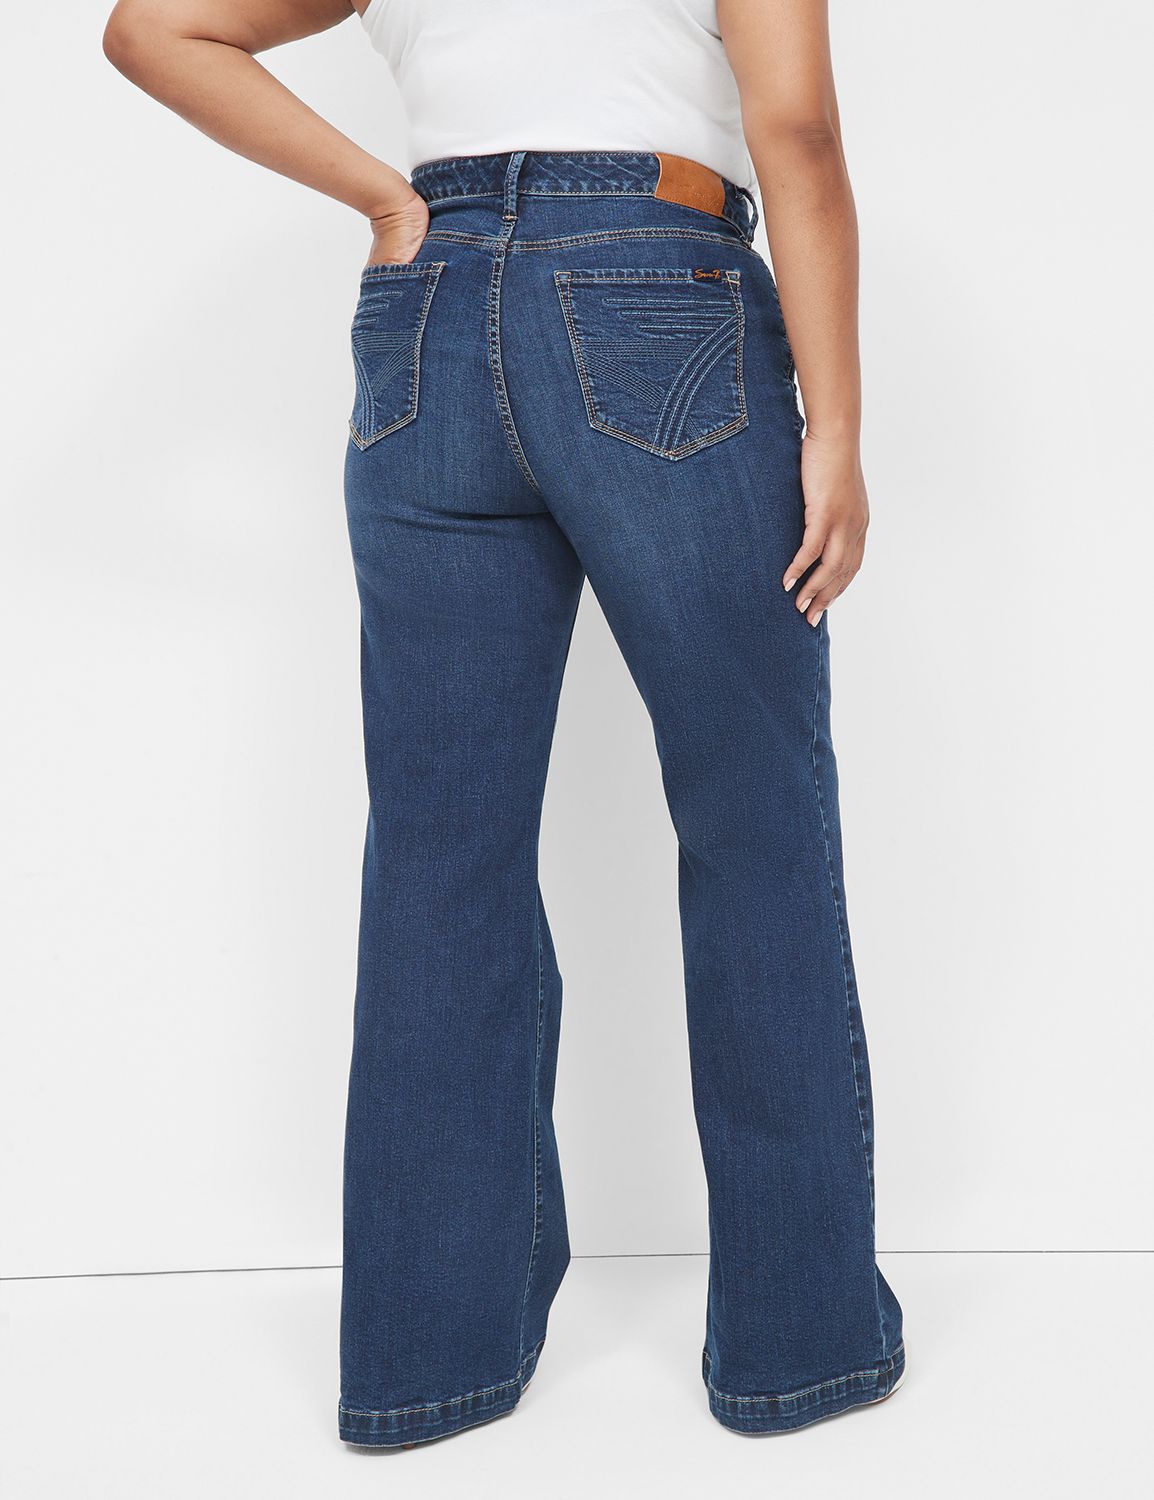 Seven7 Jeans Discounts and Cash Back for Everyone